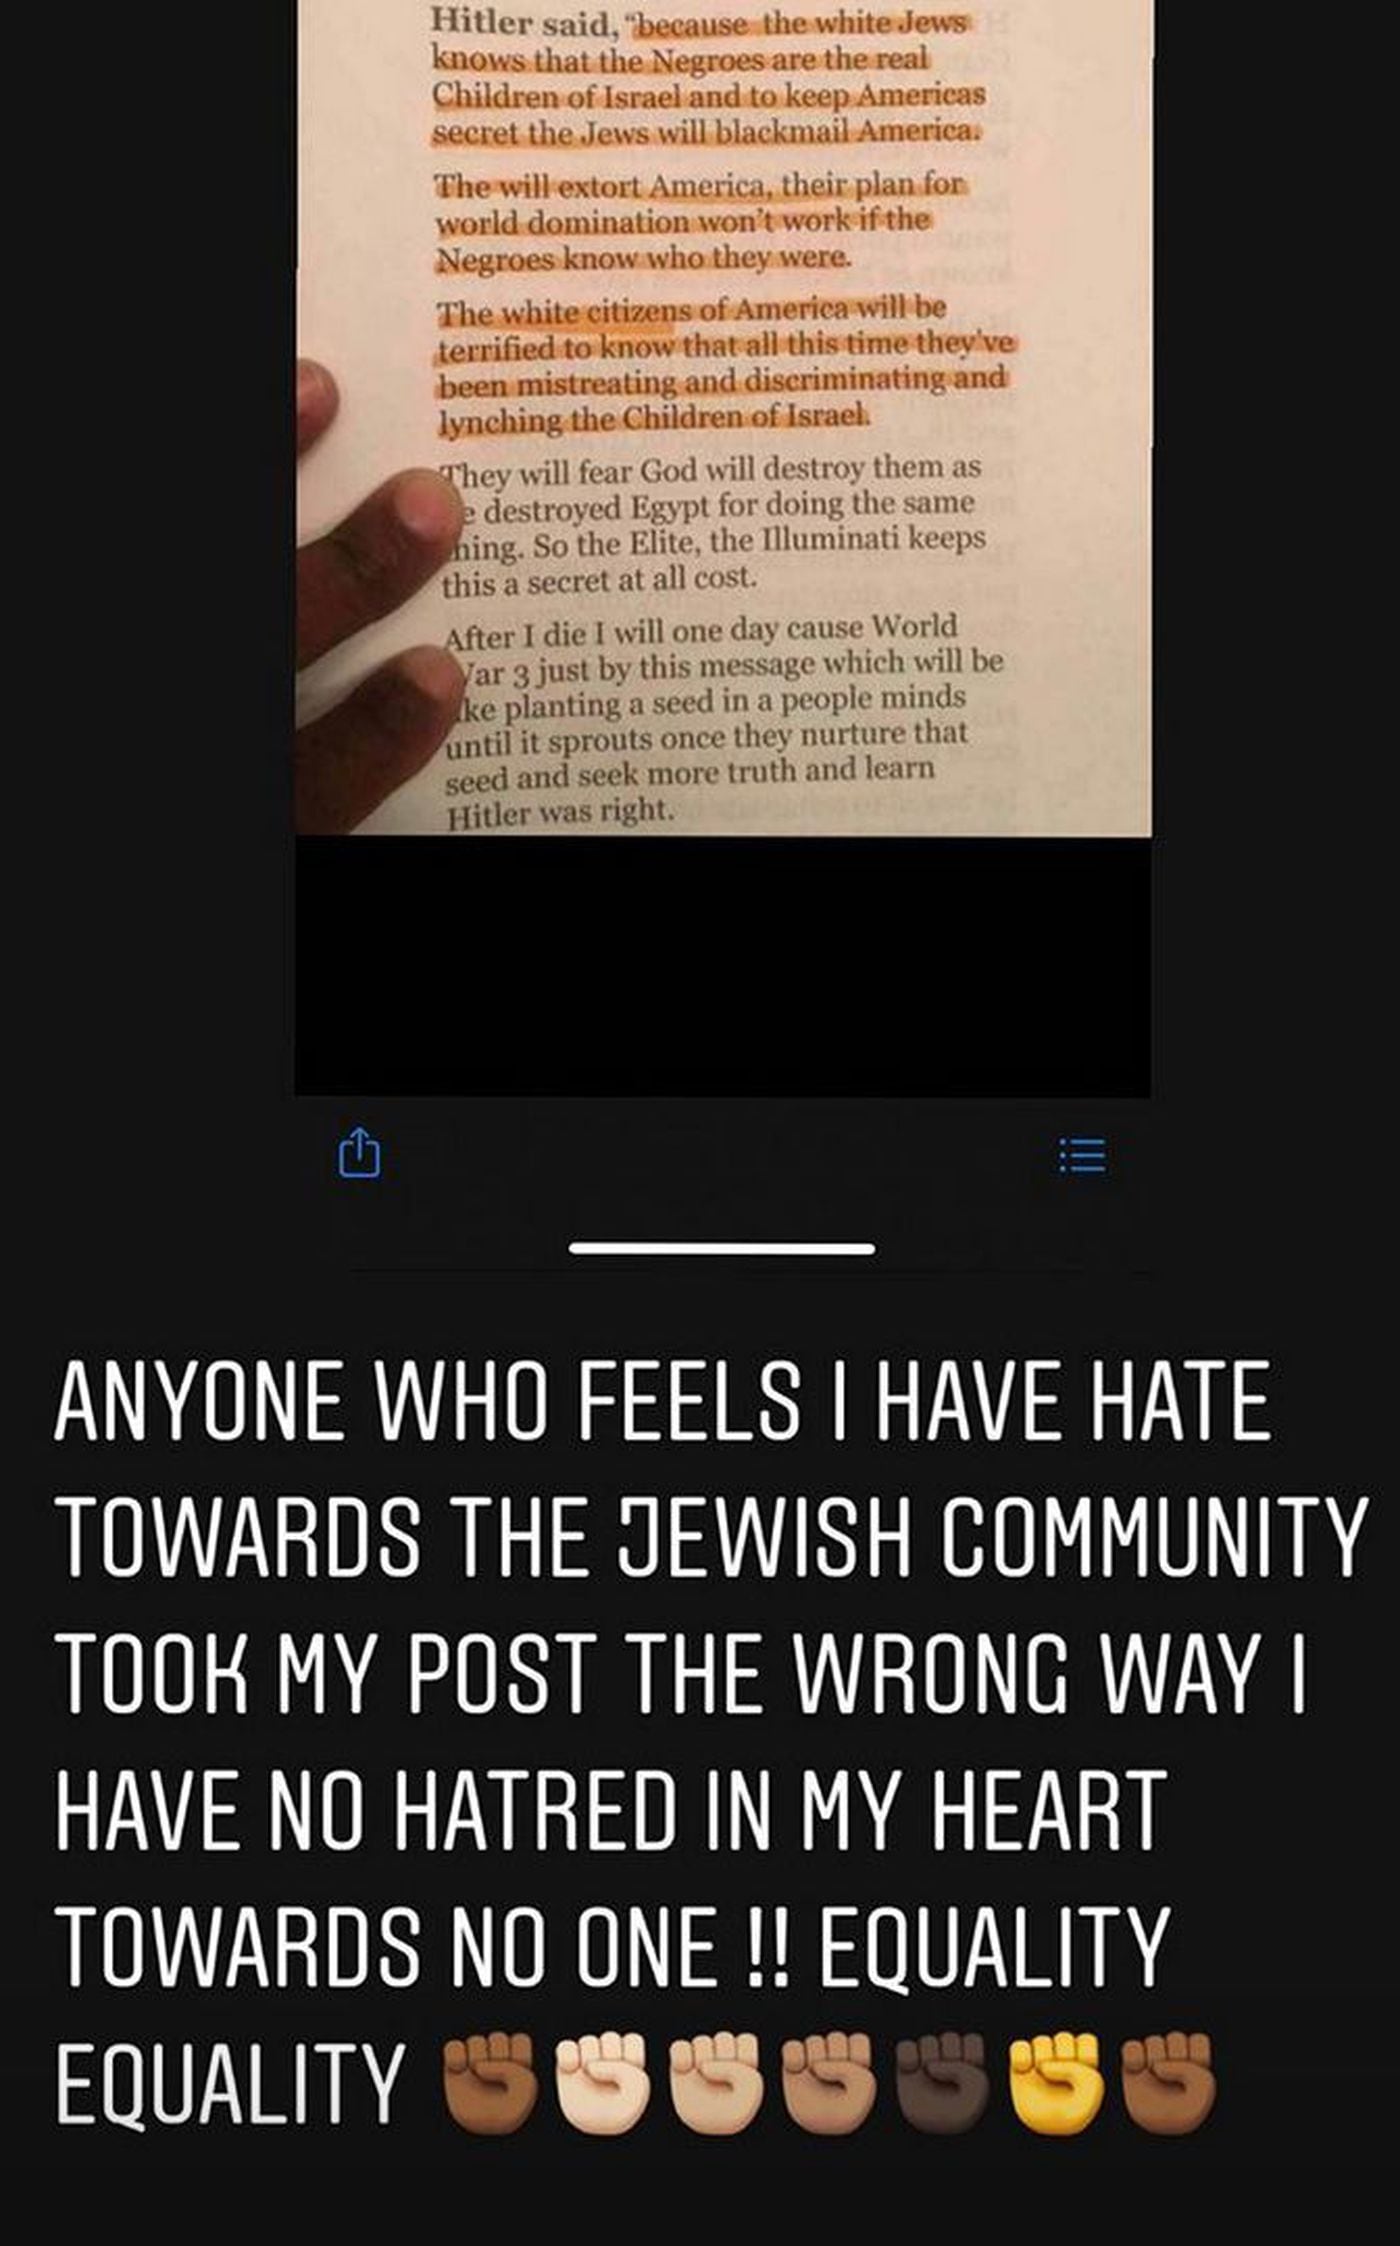 A screenshot of a passage of text shared by Eagles wide receiver DeSean Jackson expressing anti-Semetic views falsely attributed to Adolf Hitler.